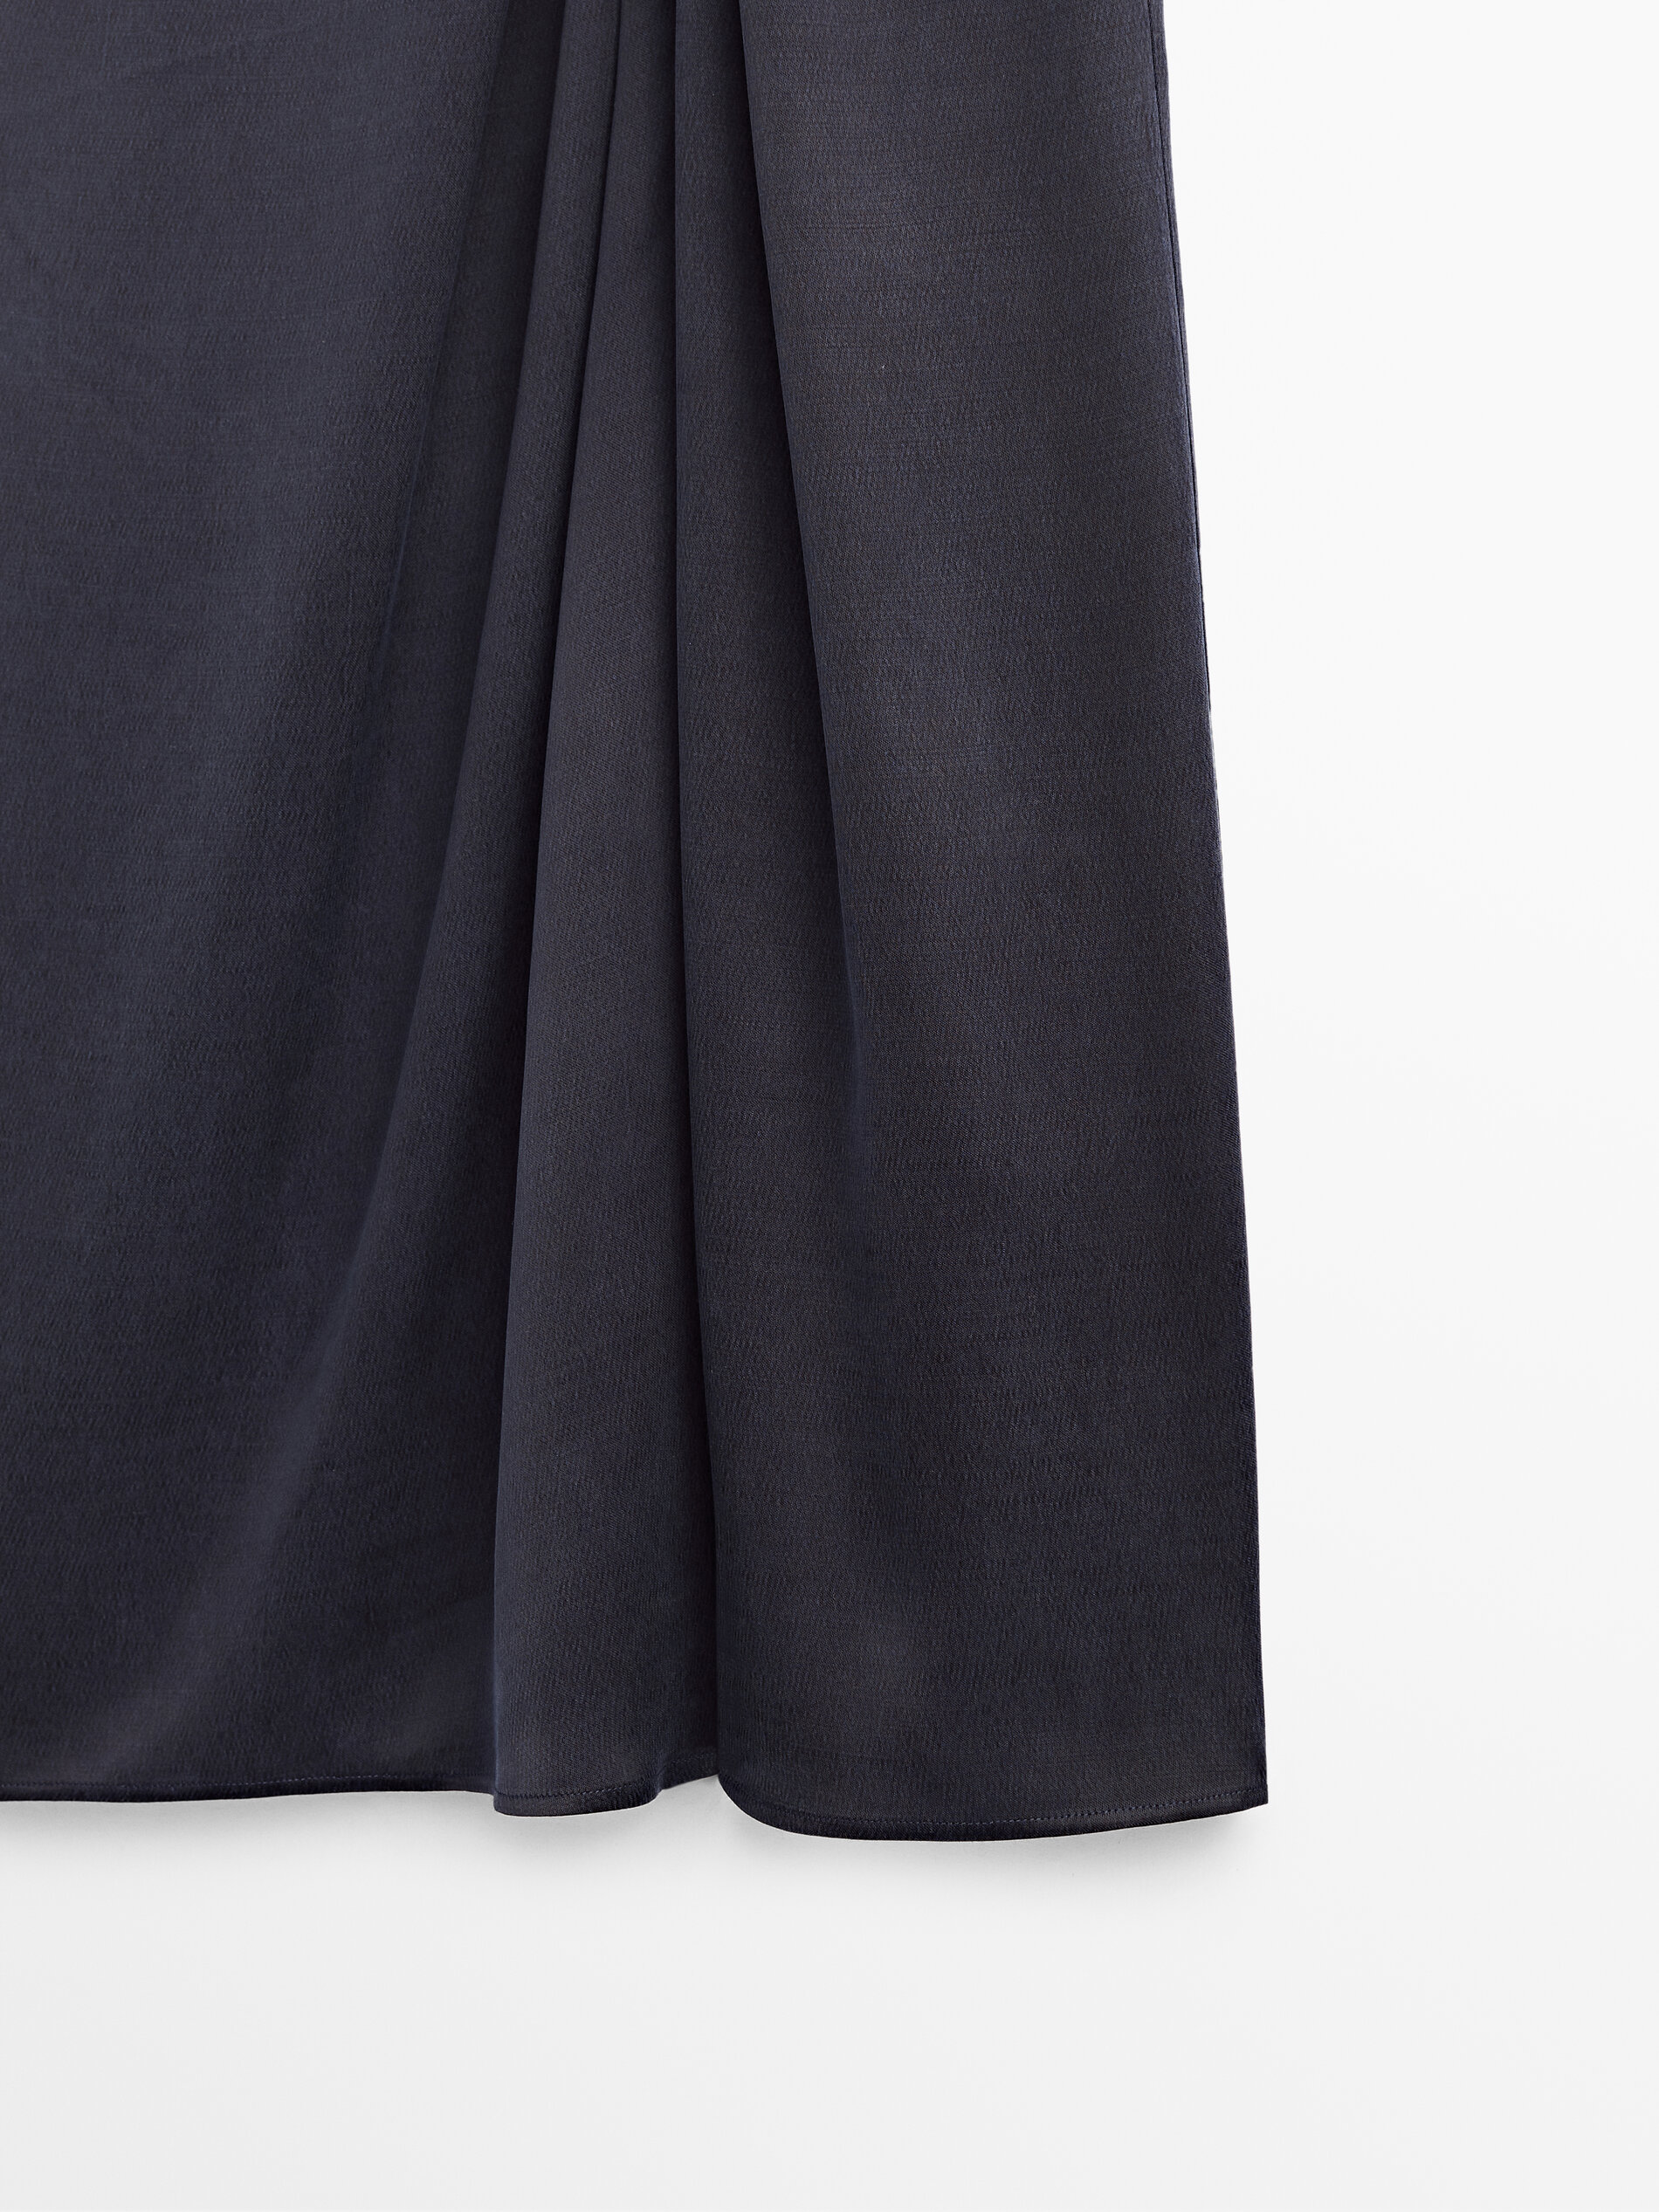 Massimo Dutti - Cupro skirt with knot detail